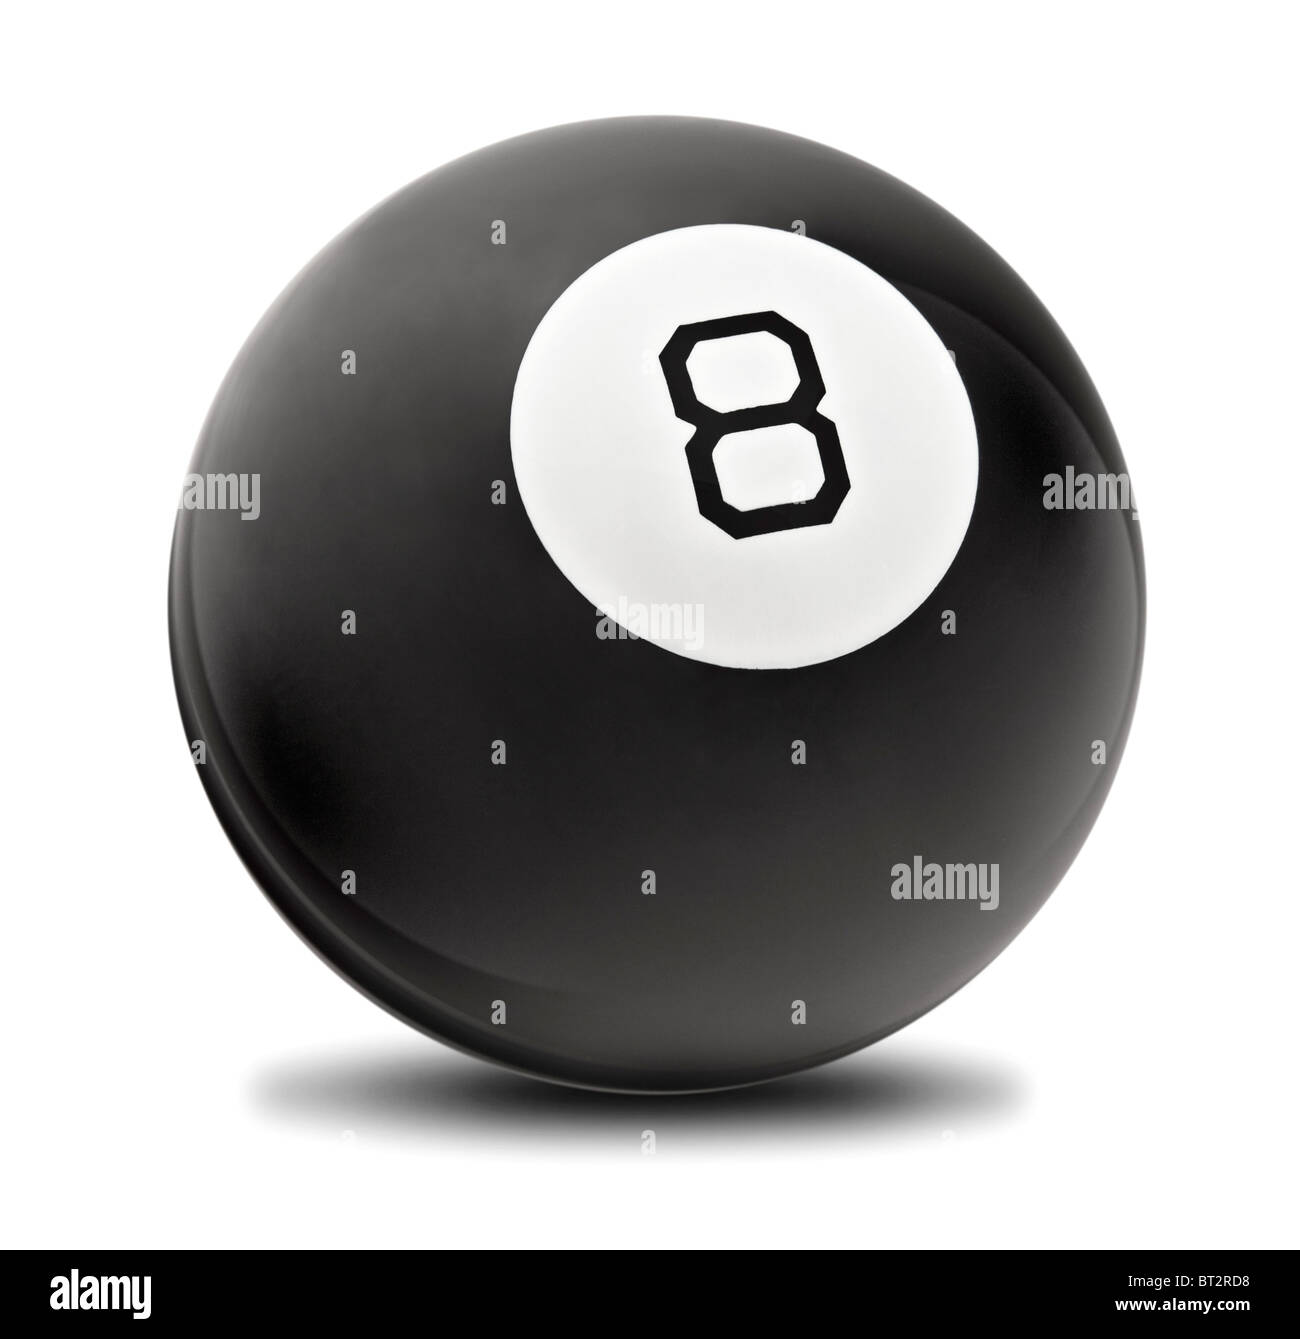 Set Of Four Magic 8 Balls With Negative Predictions Isolated On White  Background Stock Photo - Download Image Now - iStock